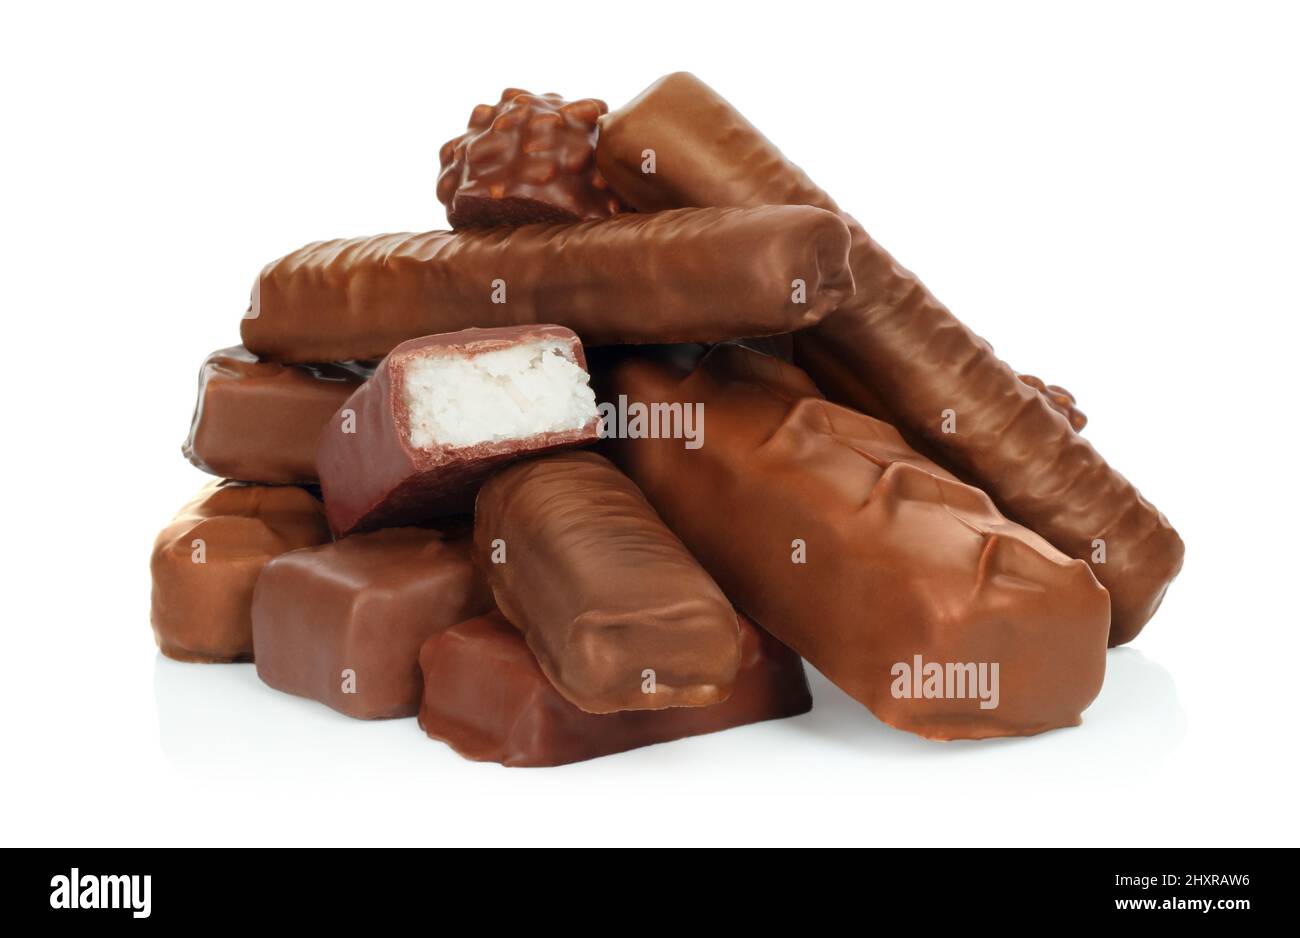 Heap of chocolate bars on white background close-up Stock Photo